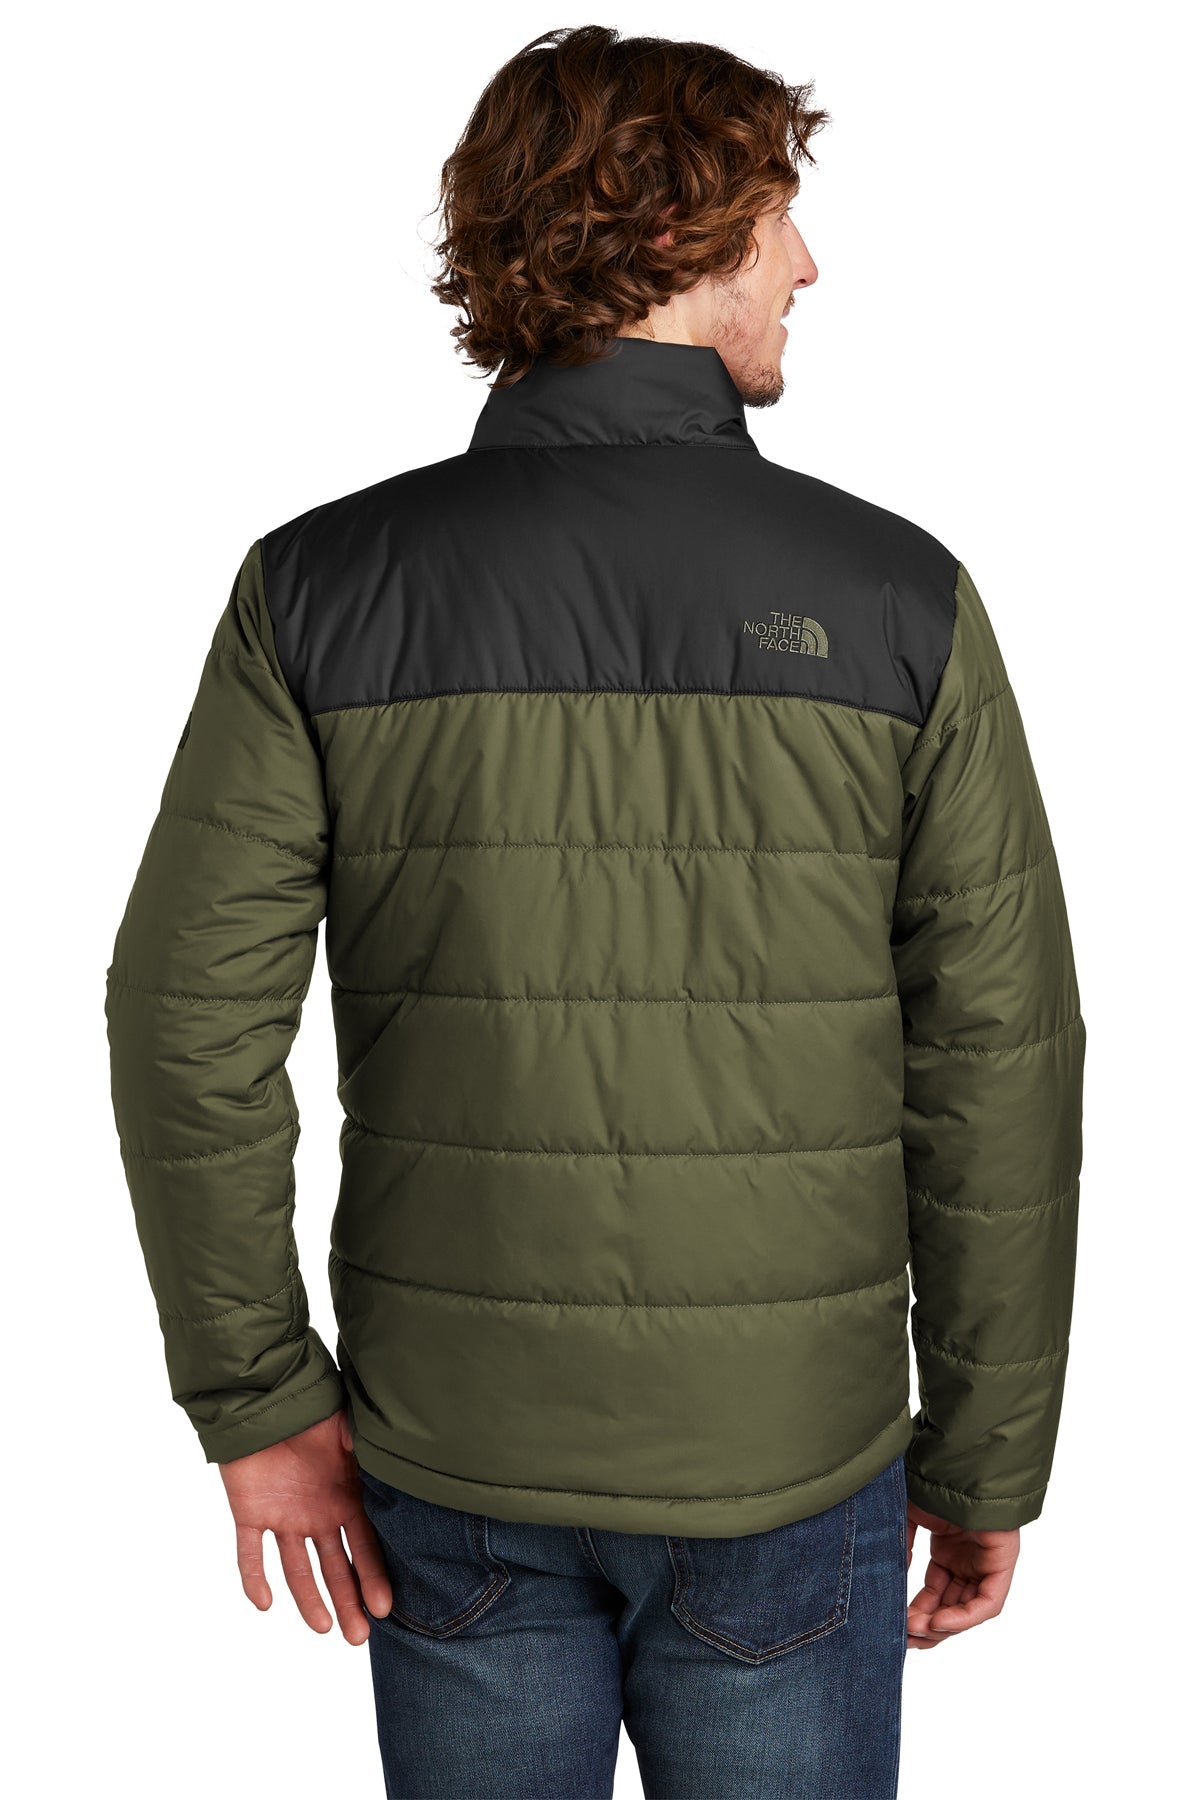 The North Face Burnt Olive Green NF0A529K custom logo jackets